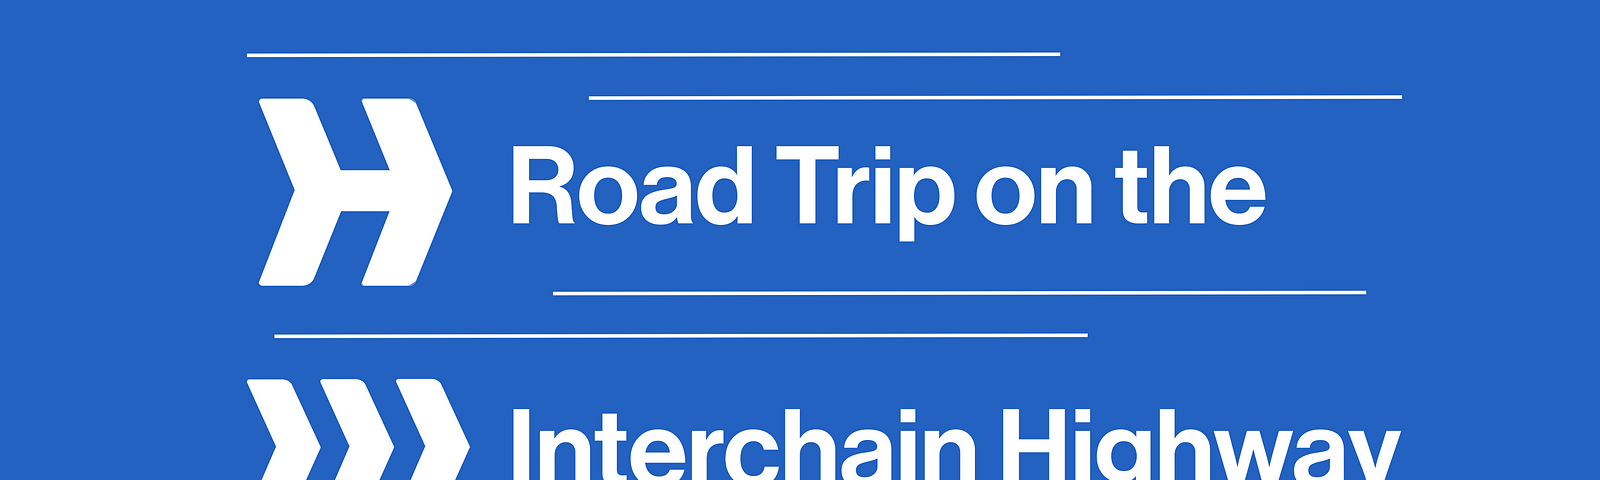 Road trip on the interchain highway